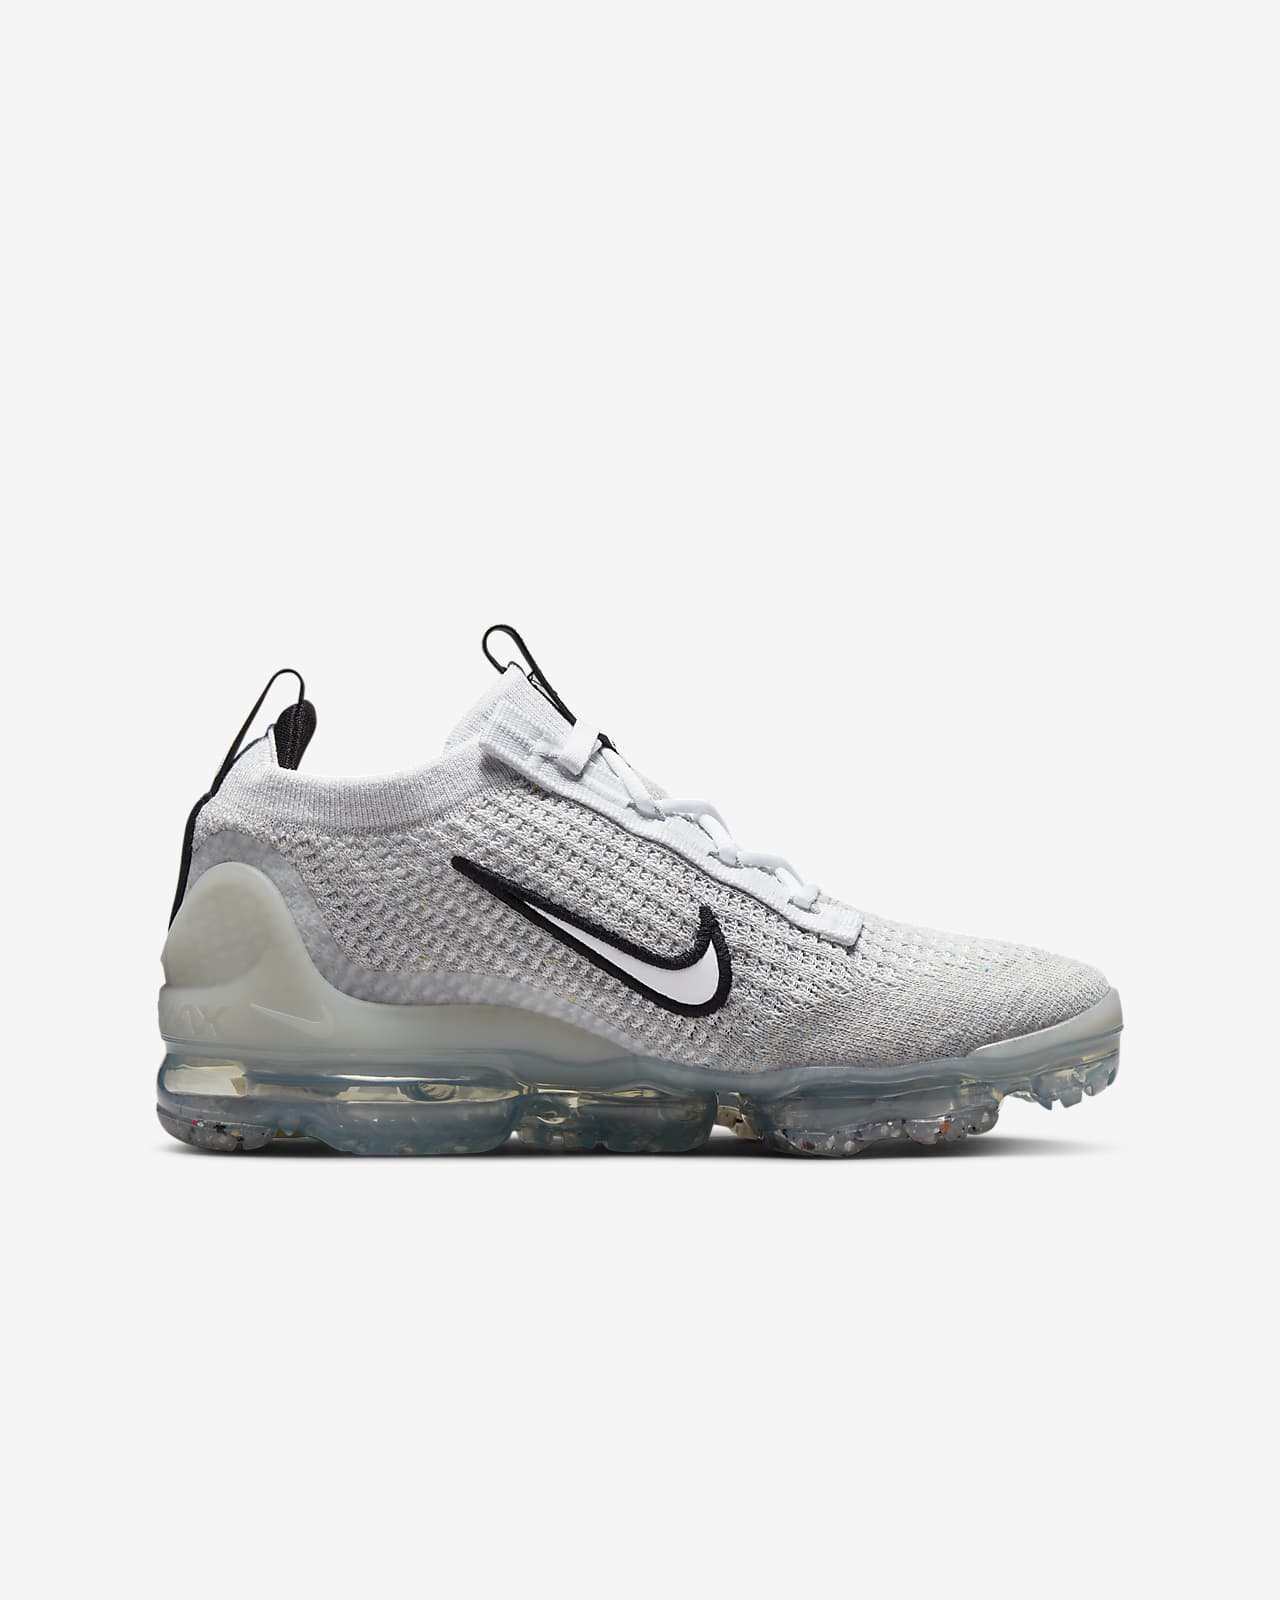 vapormax youth size 7